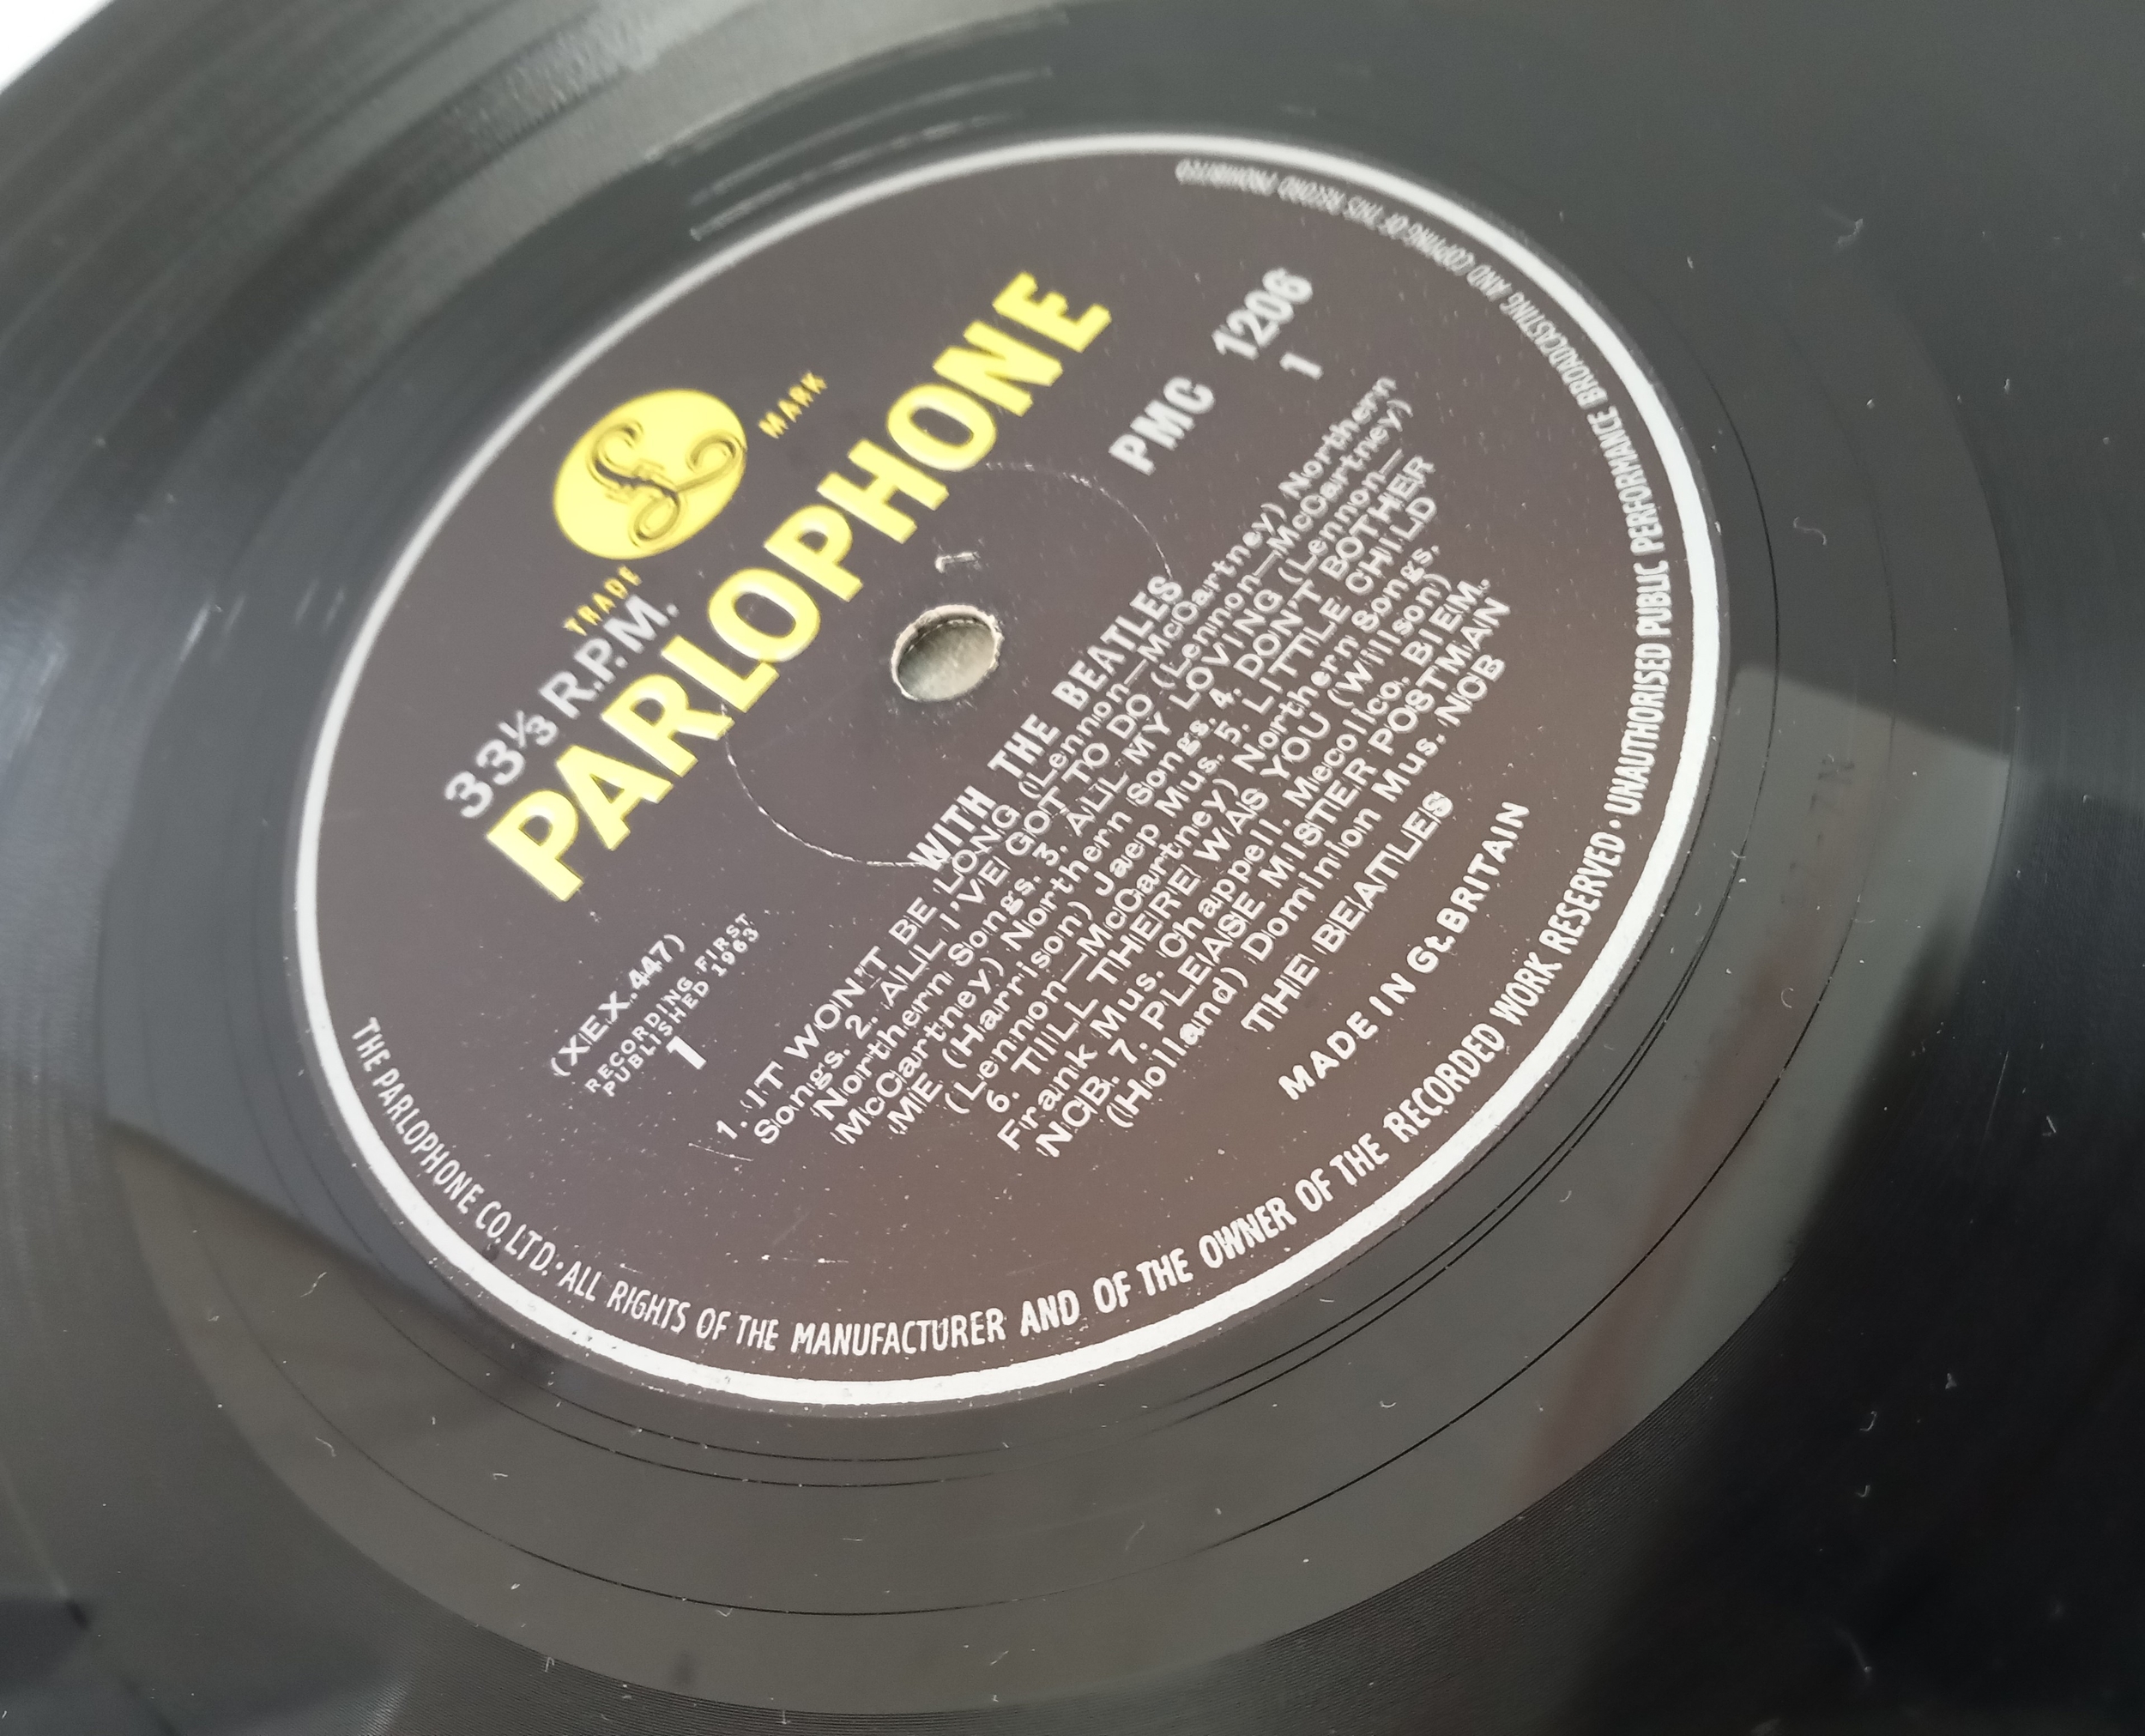 The Beatles For Sale PMC 1240 Mono Black & Yellow Parlophone UK First Pressing condition excellent & - Image 7 of 8